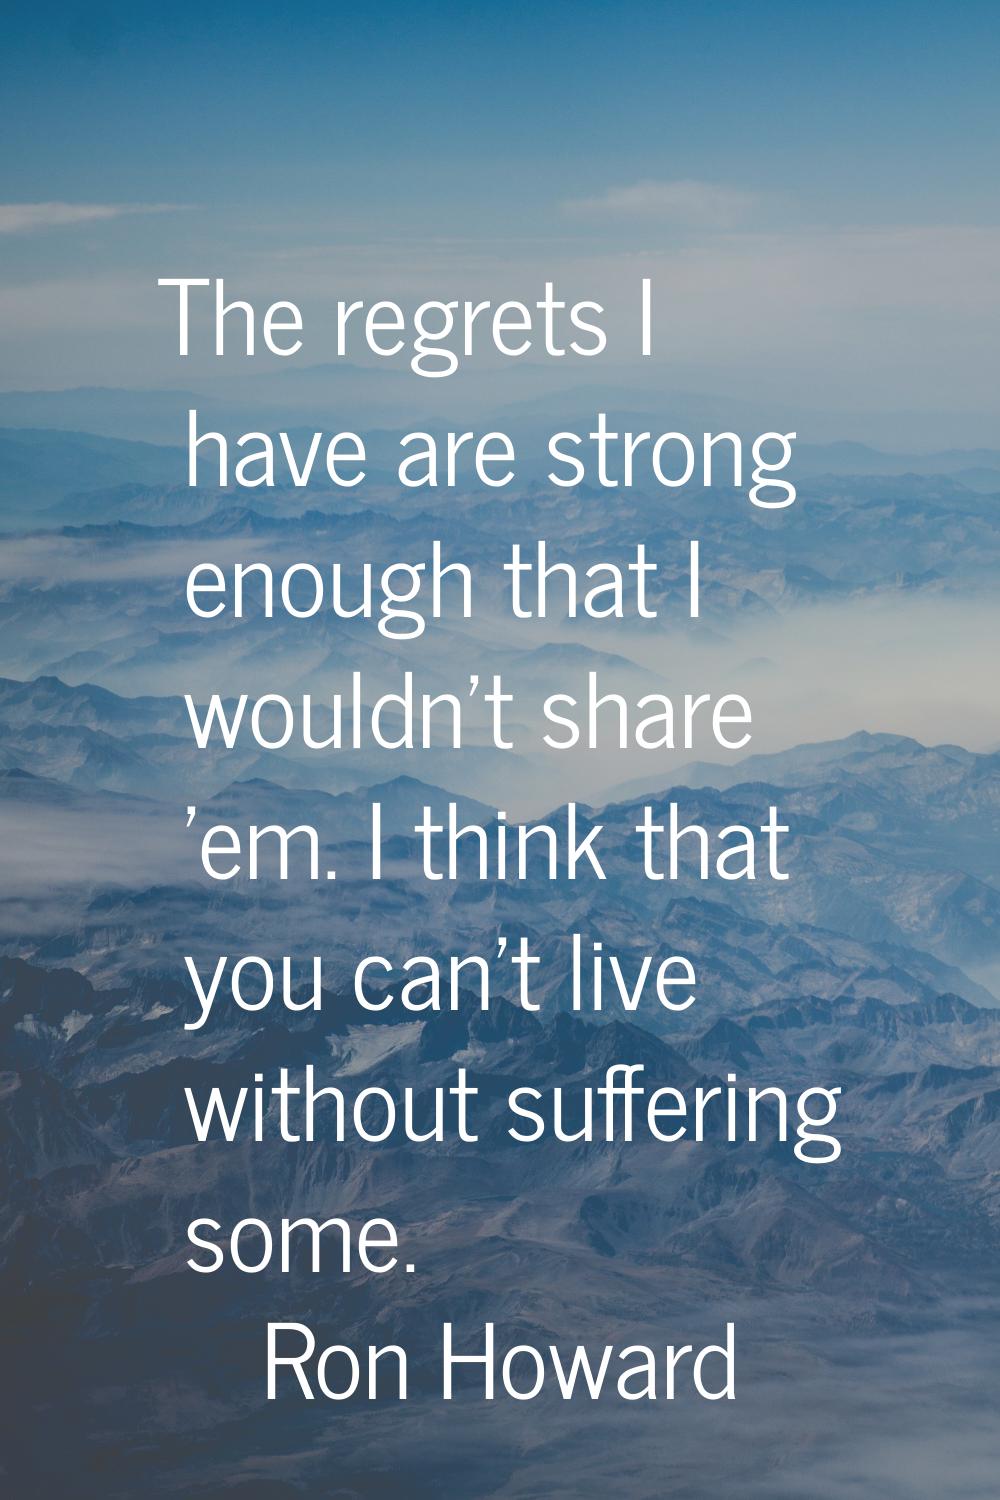 The regrets I have are strong enough that I wouldn't share 'em. I think that you can't live without